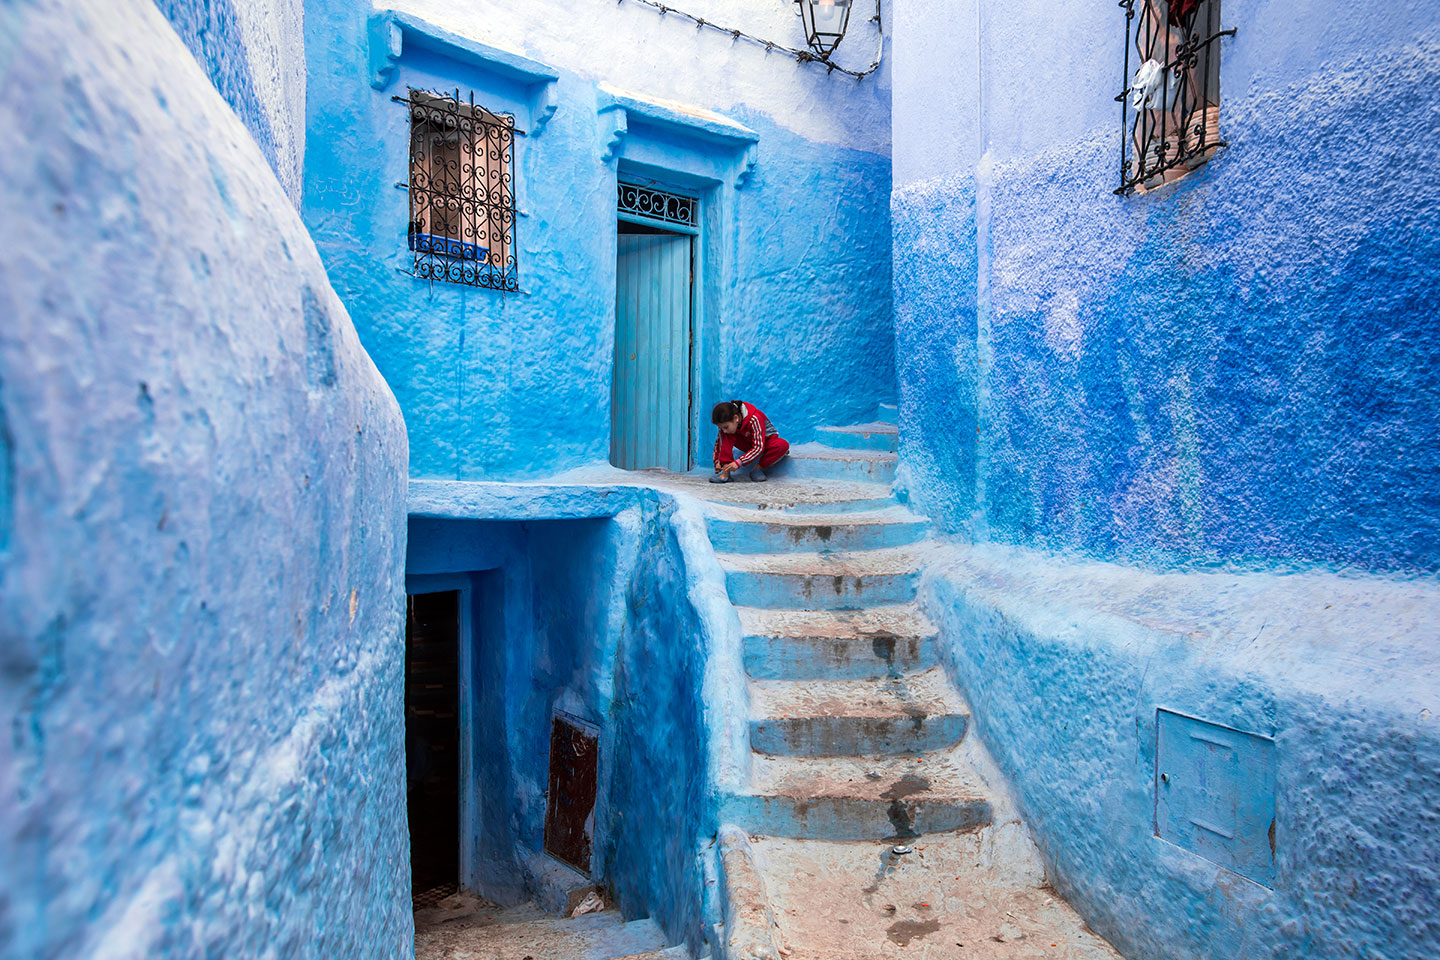 The blue village of Chefchaouen in northern Morocco